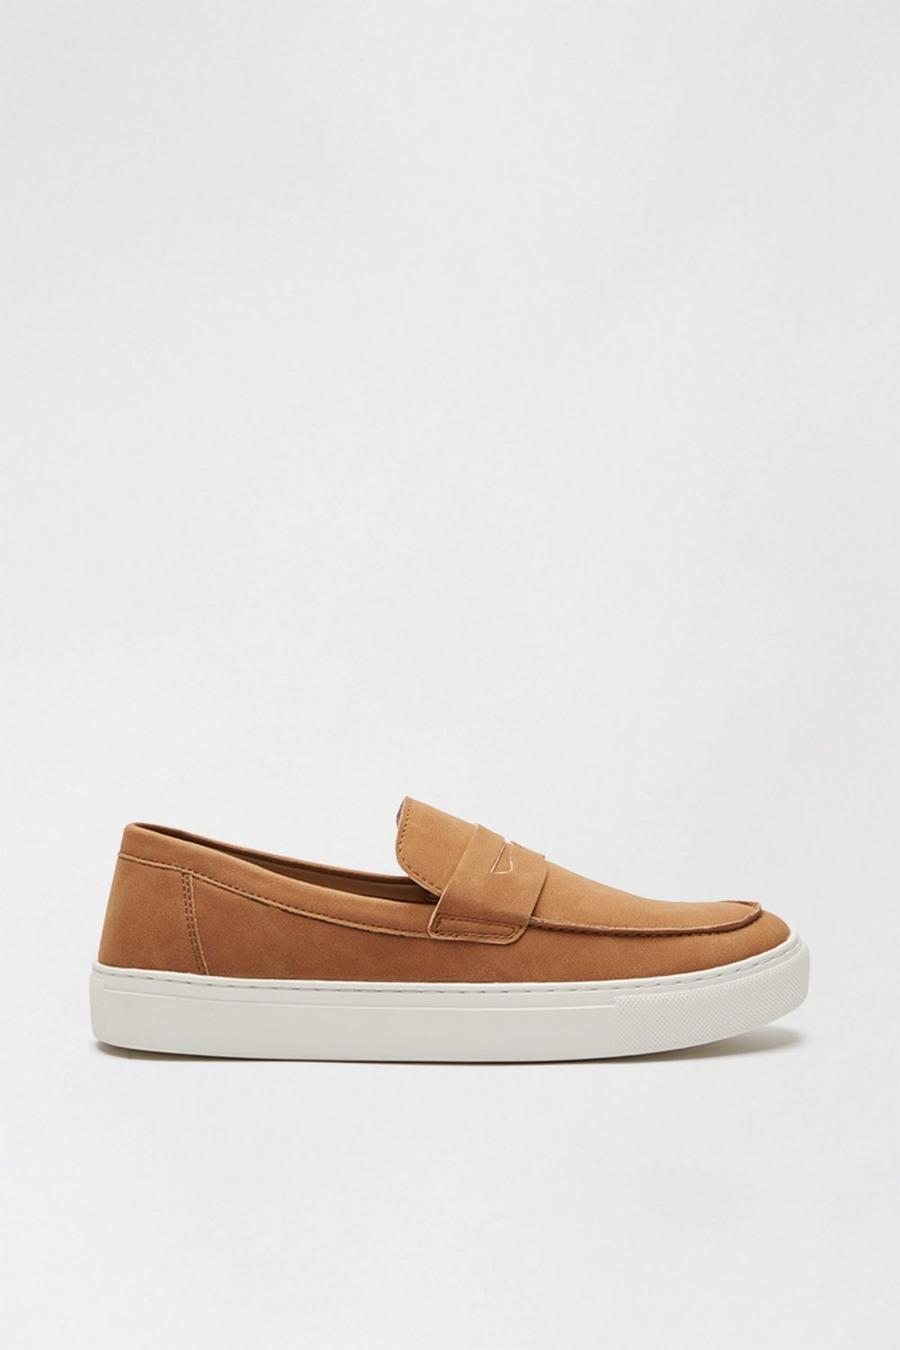 Suede Look Slip On Shoes With Band